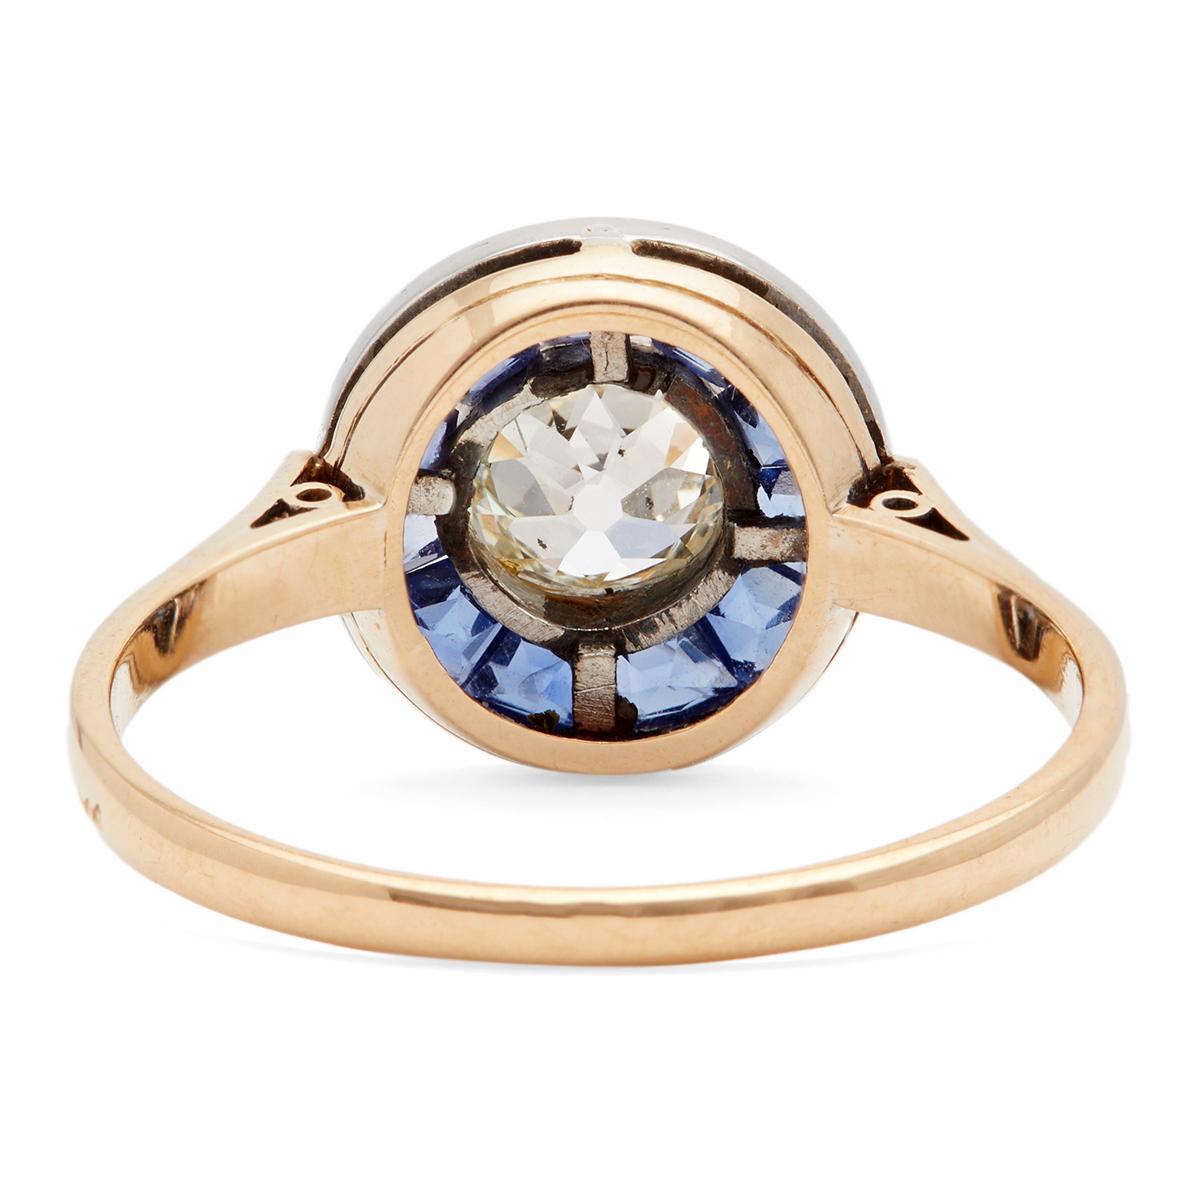 Edwardian Revival Old Mine Cut Diamond and Sapphire 18k Yellow Gold Platinum Tar For Sale 2